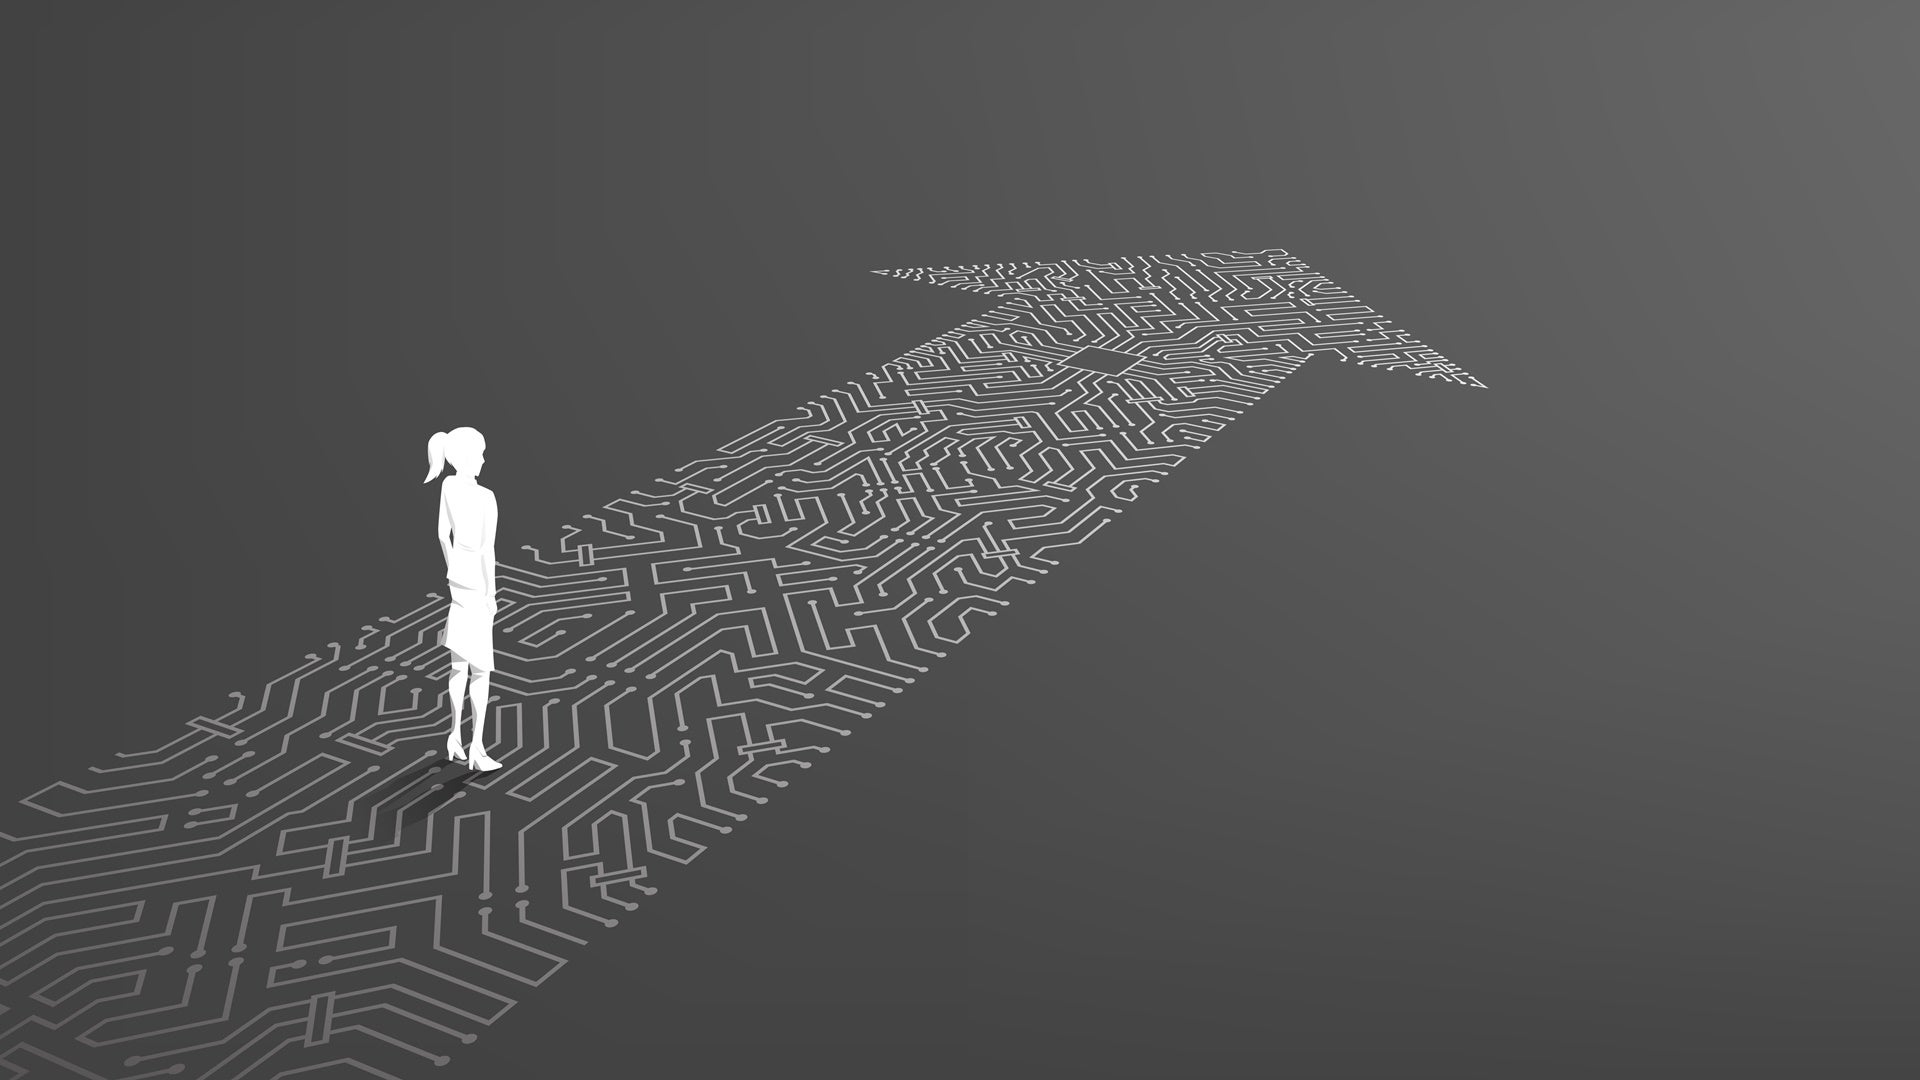 Silhouette of businesswoman standing on the arrow dot connect circuit board style. concept of digital transformation of business.